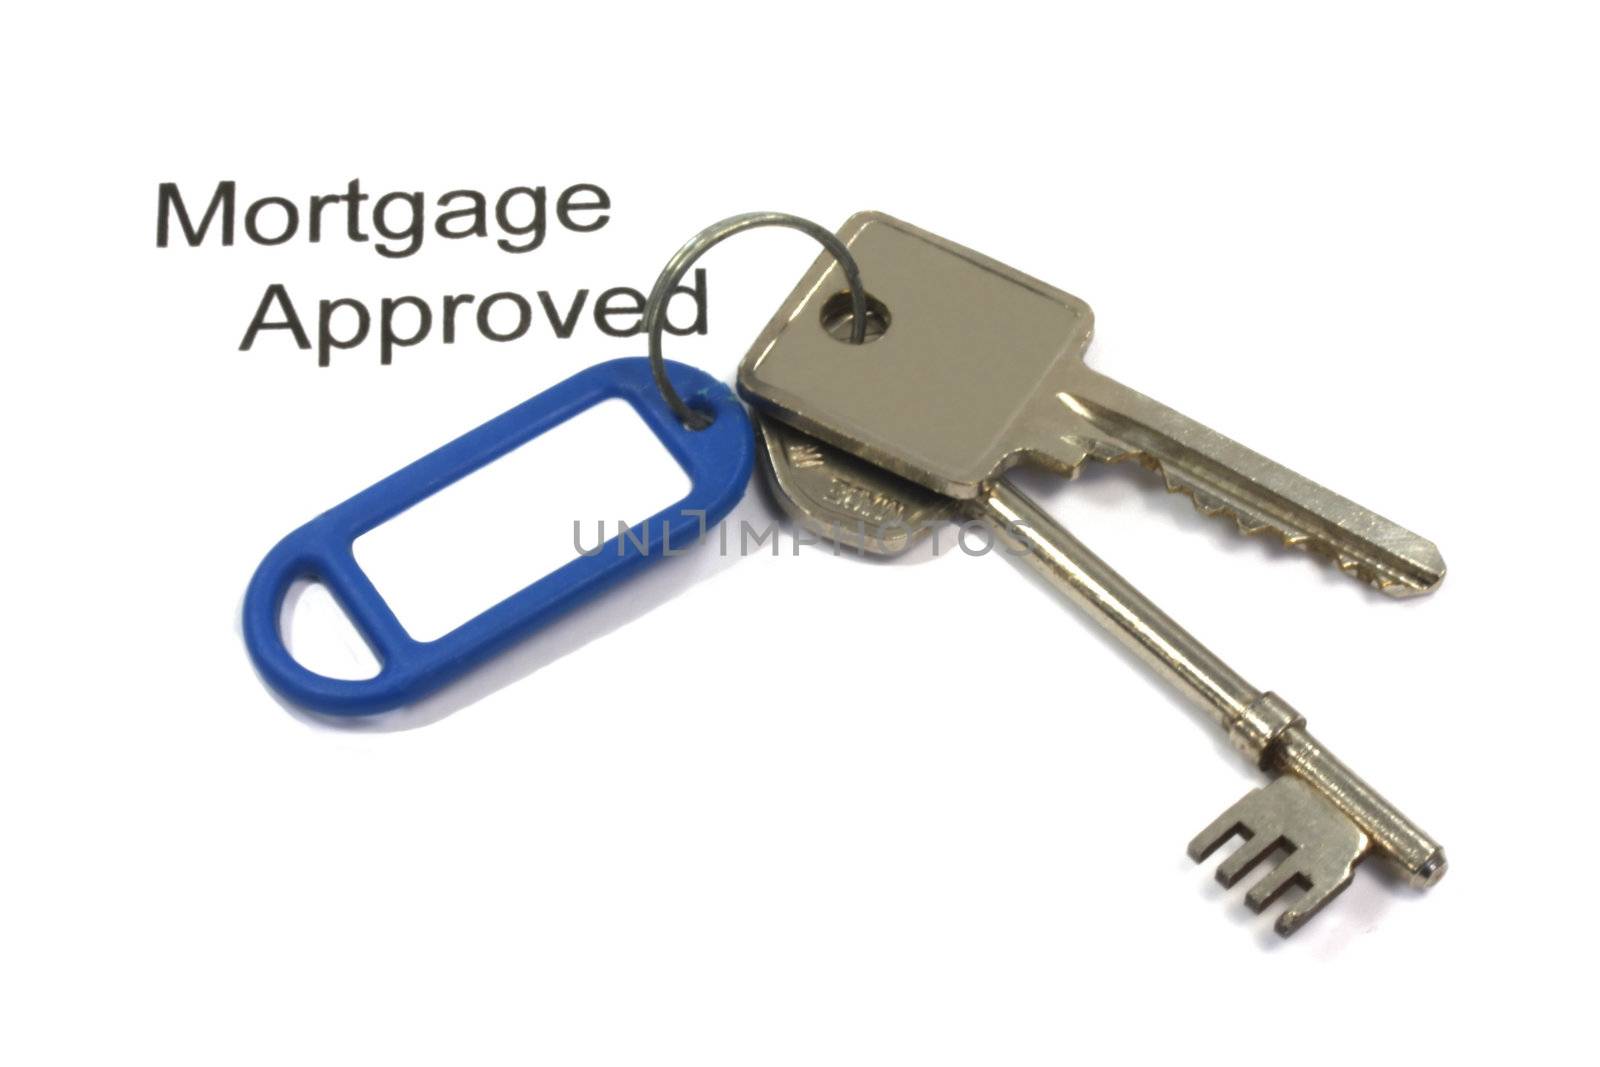 Mortgages House Keys by TVR